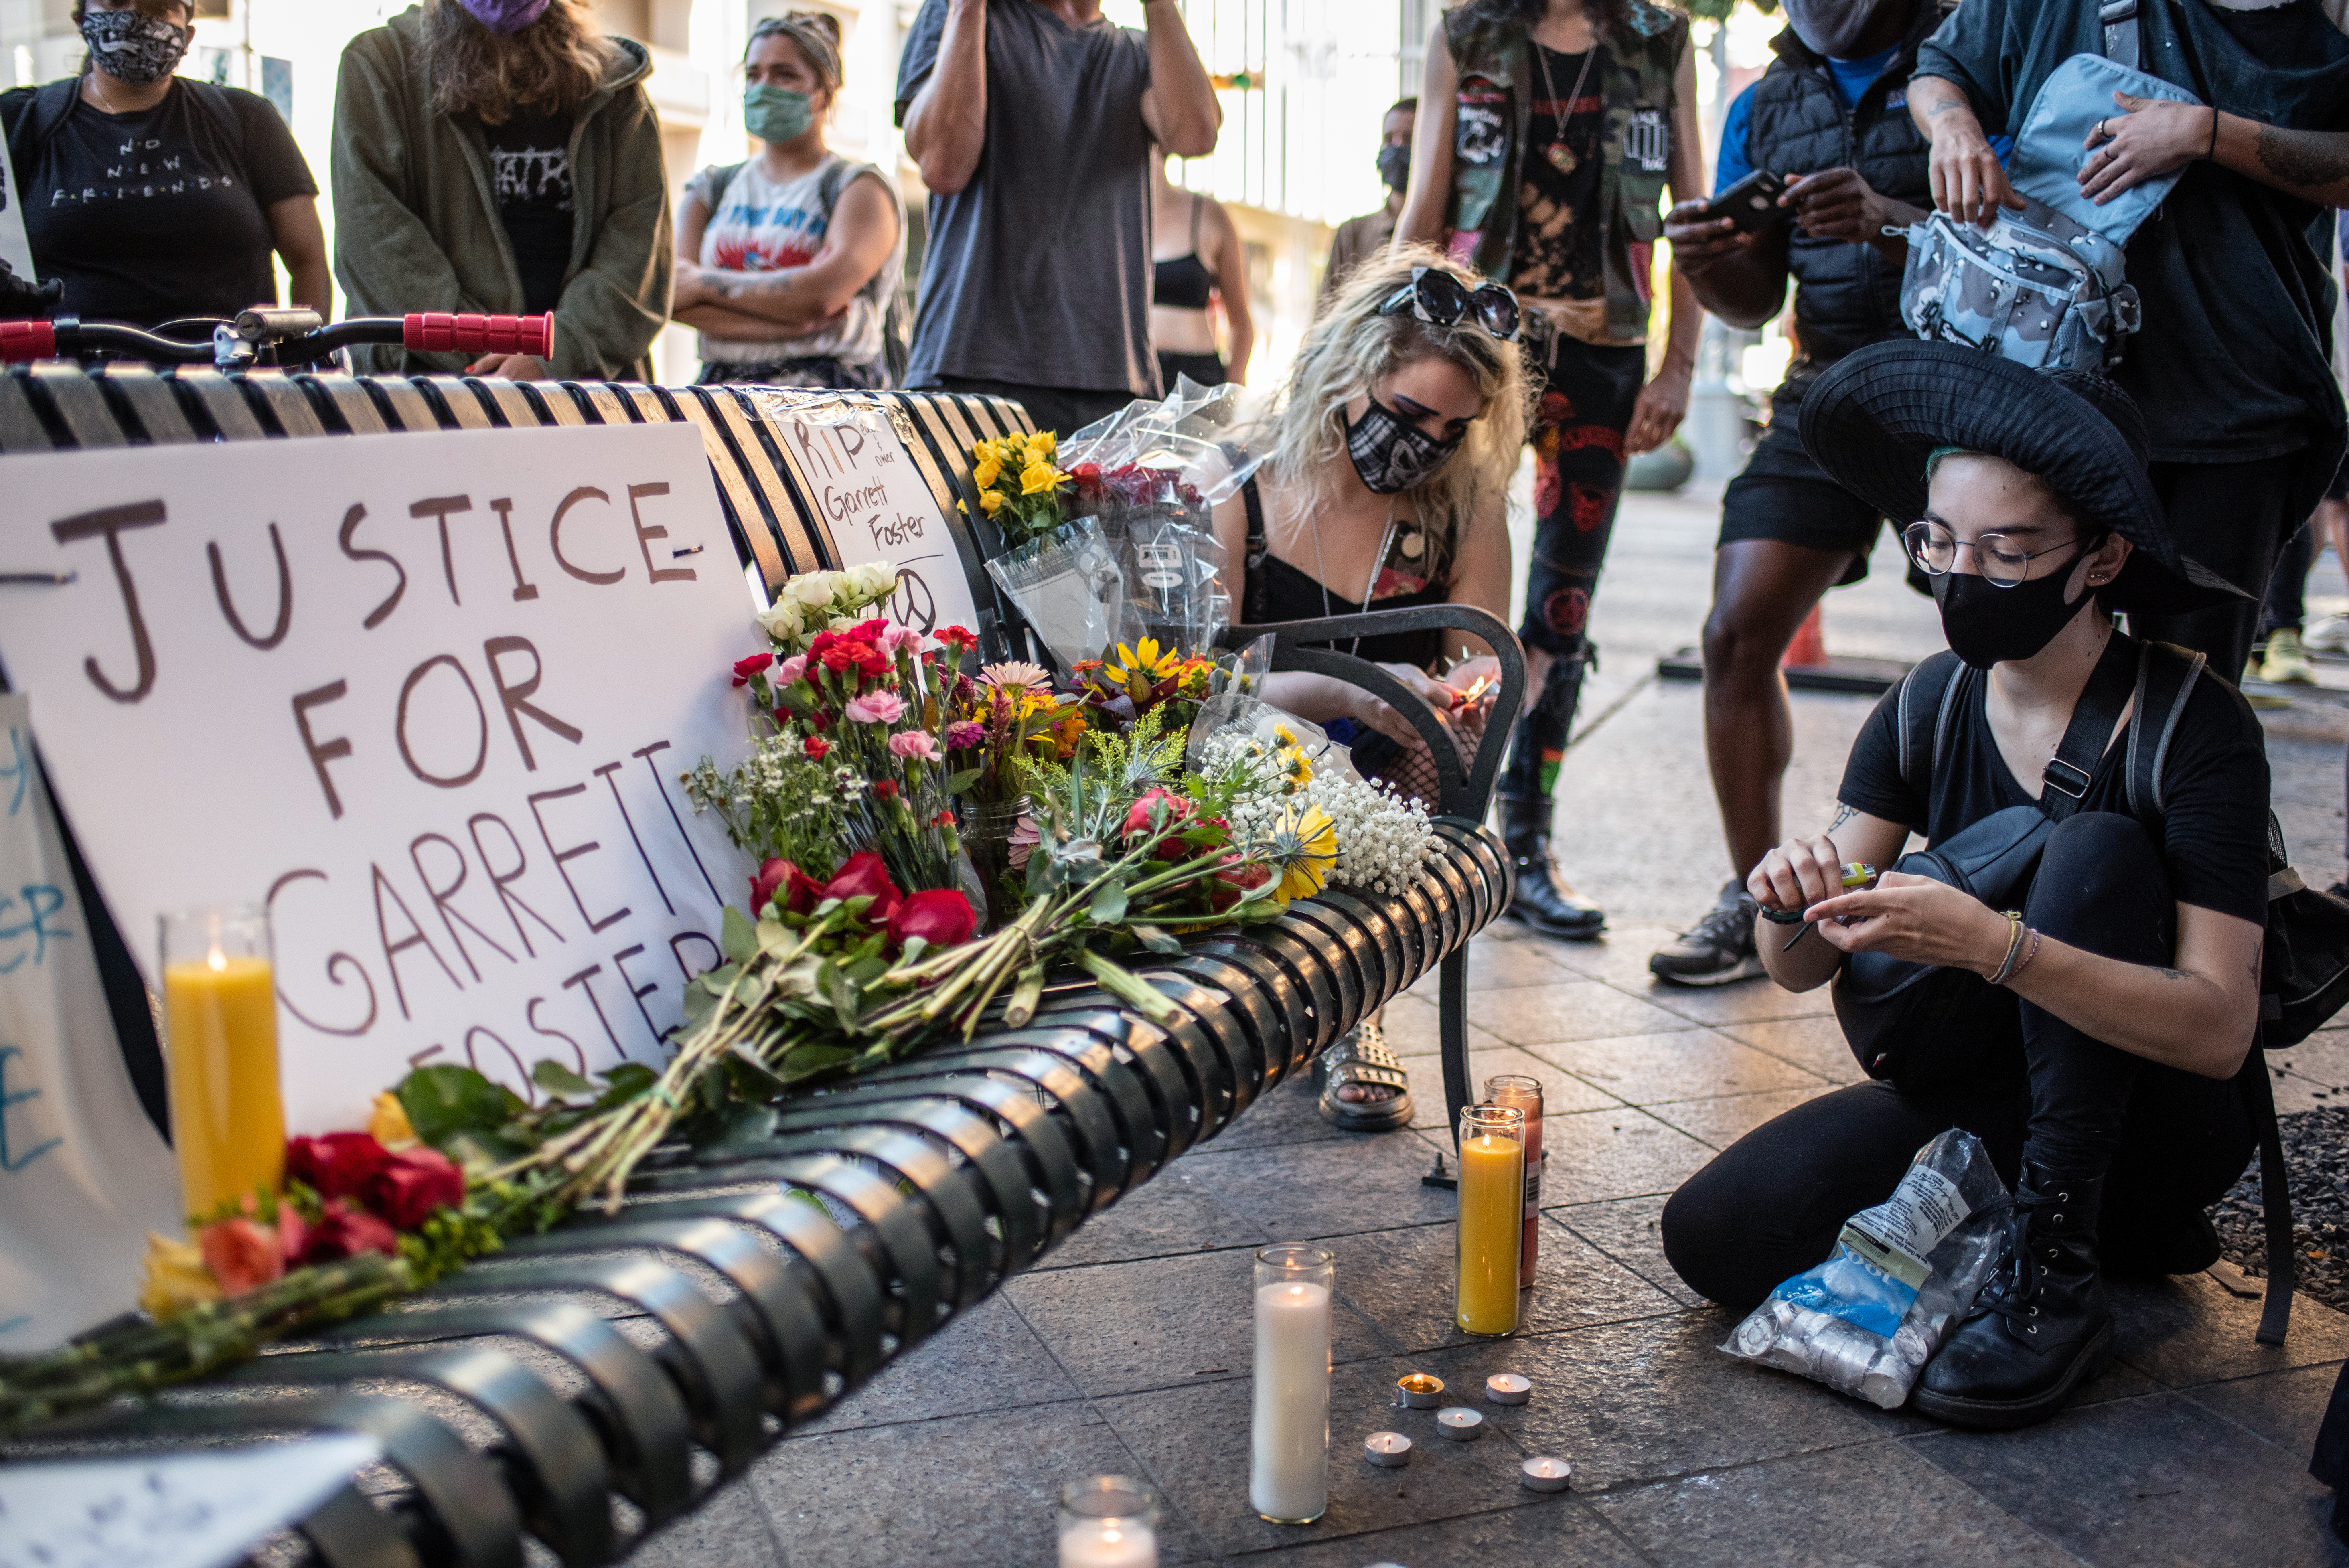 People light candles and kneel around a metal bunch with a sign reading “Justice for Garrett Foster” and several flower bouquets on it.